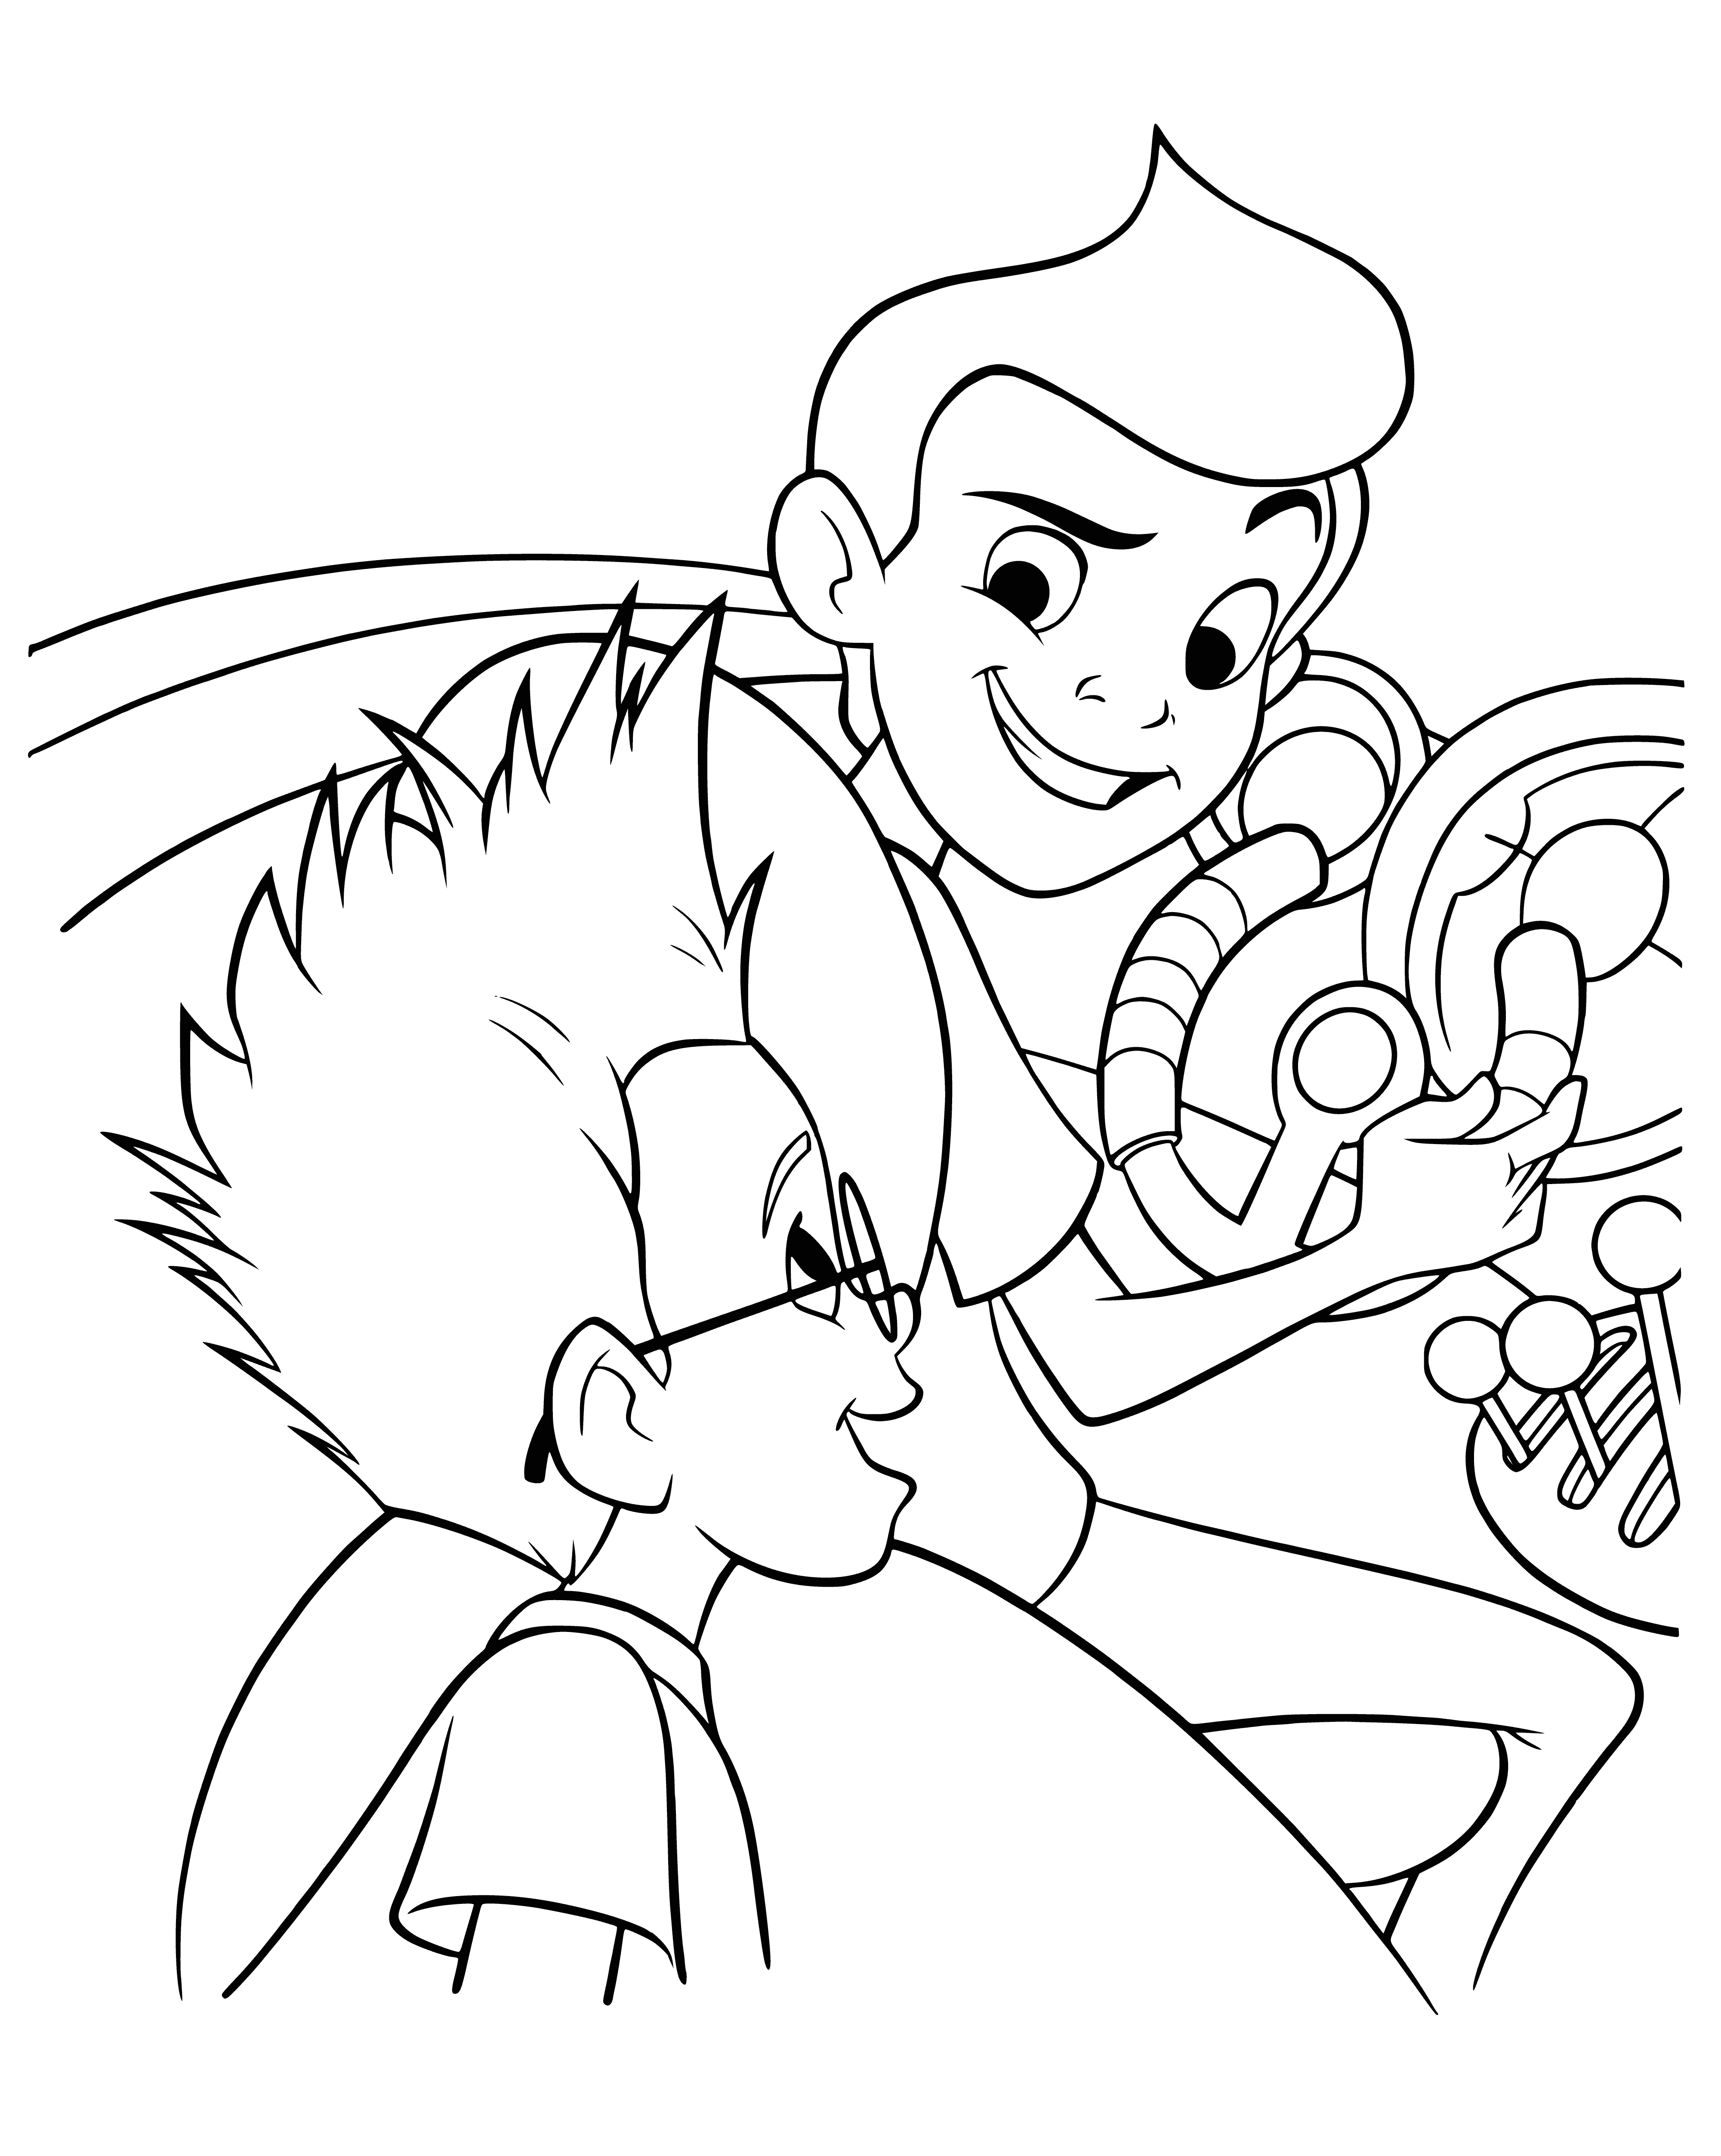 coloring page: Two characters, Lewis (red shirt) and Wilber (blue shirt), with large smiles on their faces.